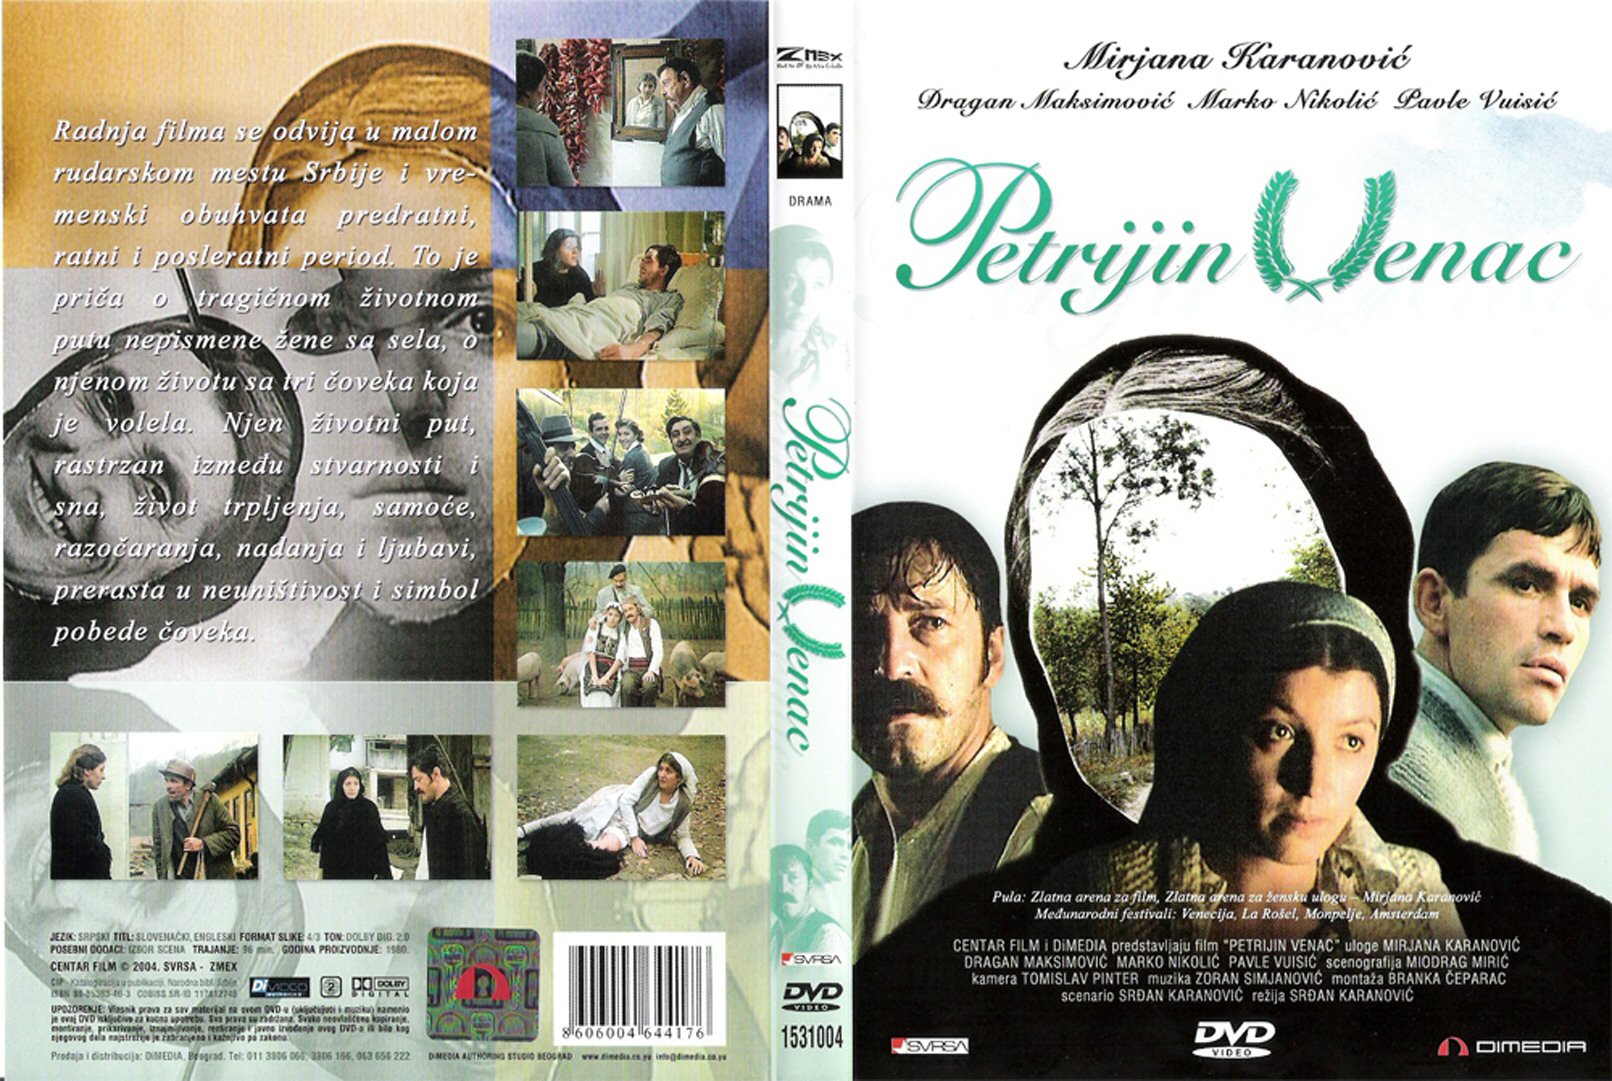 Click to view full size image -  DVD Cover - P - petrijin_venac_dvd - petrijin_venac_dvd.jpg